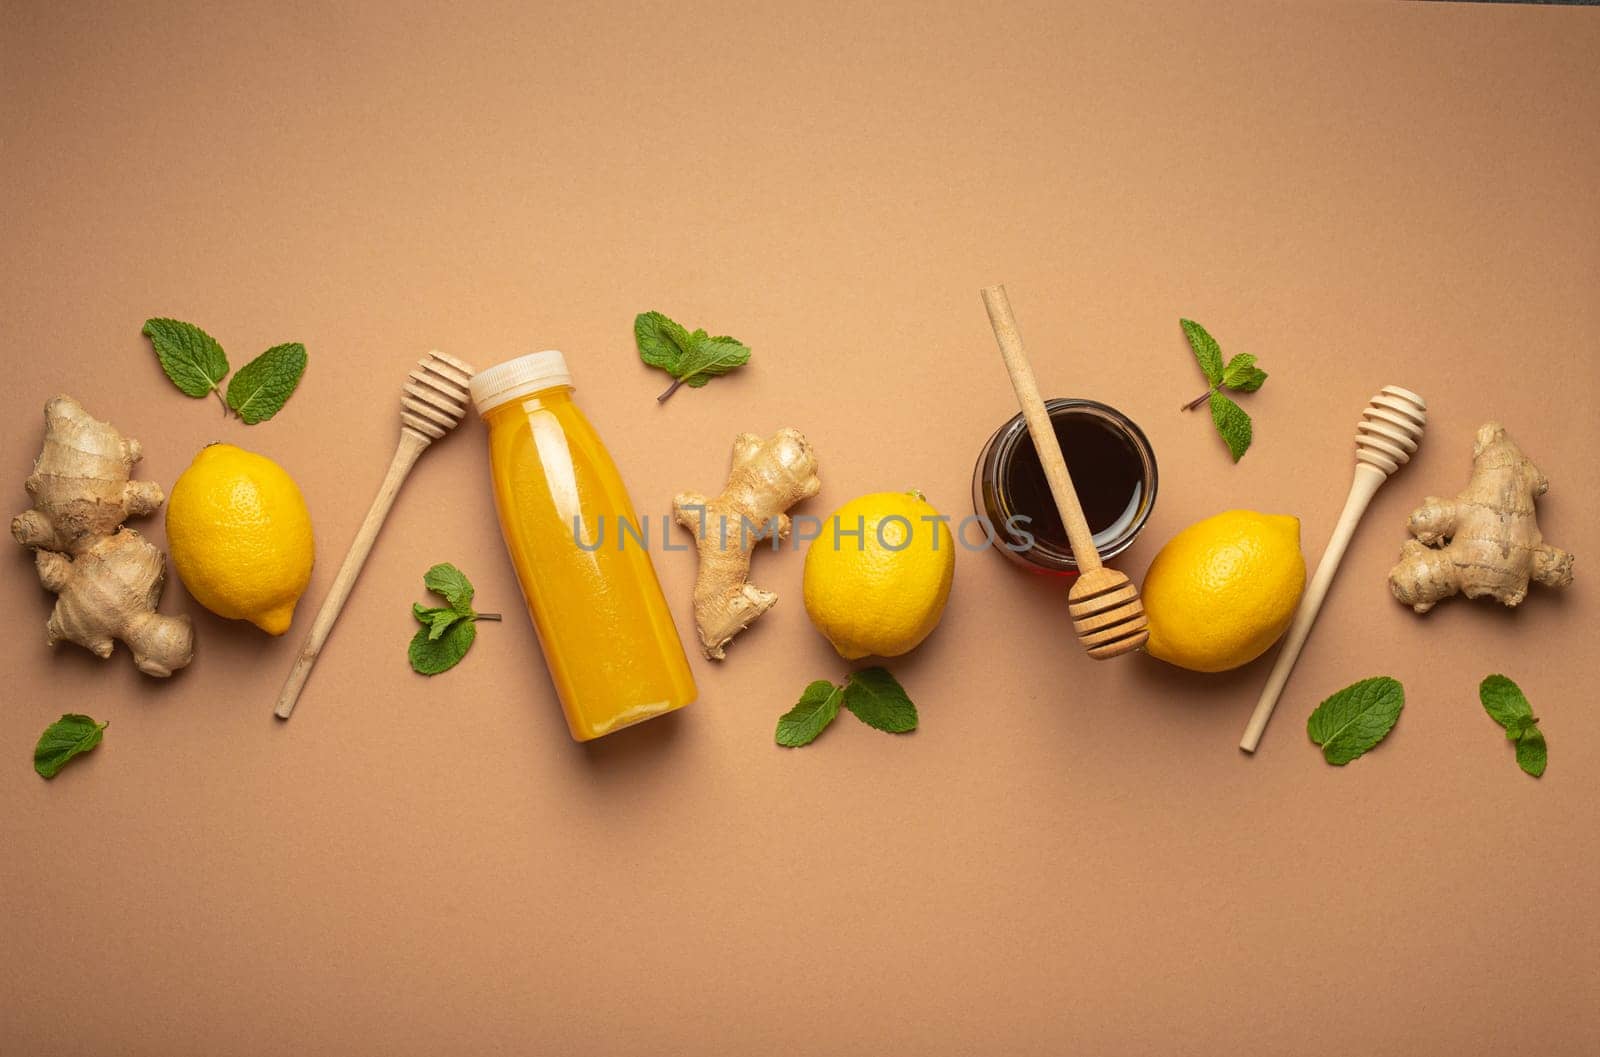 Composition with detox drink, lemons, mint, ginger, honey in glass jar, honey wooden dippers top view. Food for immunity stimulation and against flu. Healthy natural remedies to boost immune system.